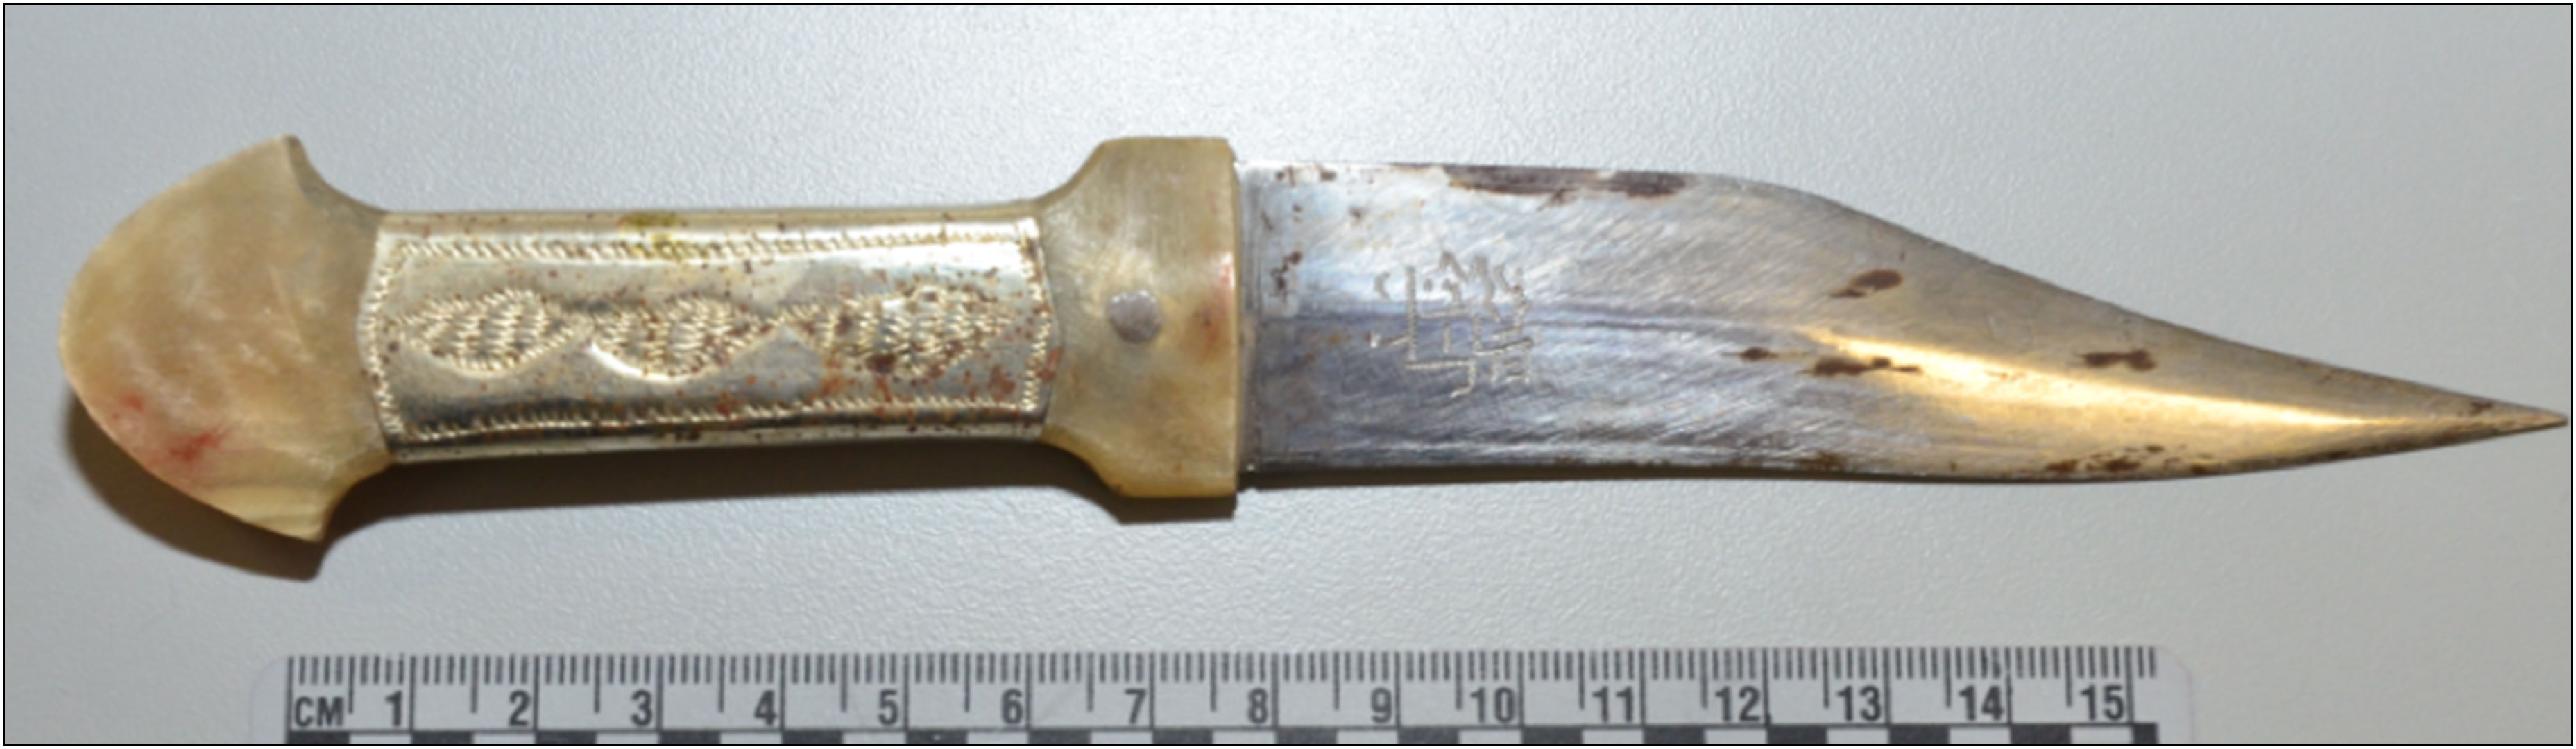 photo of the knife